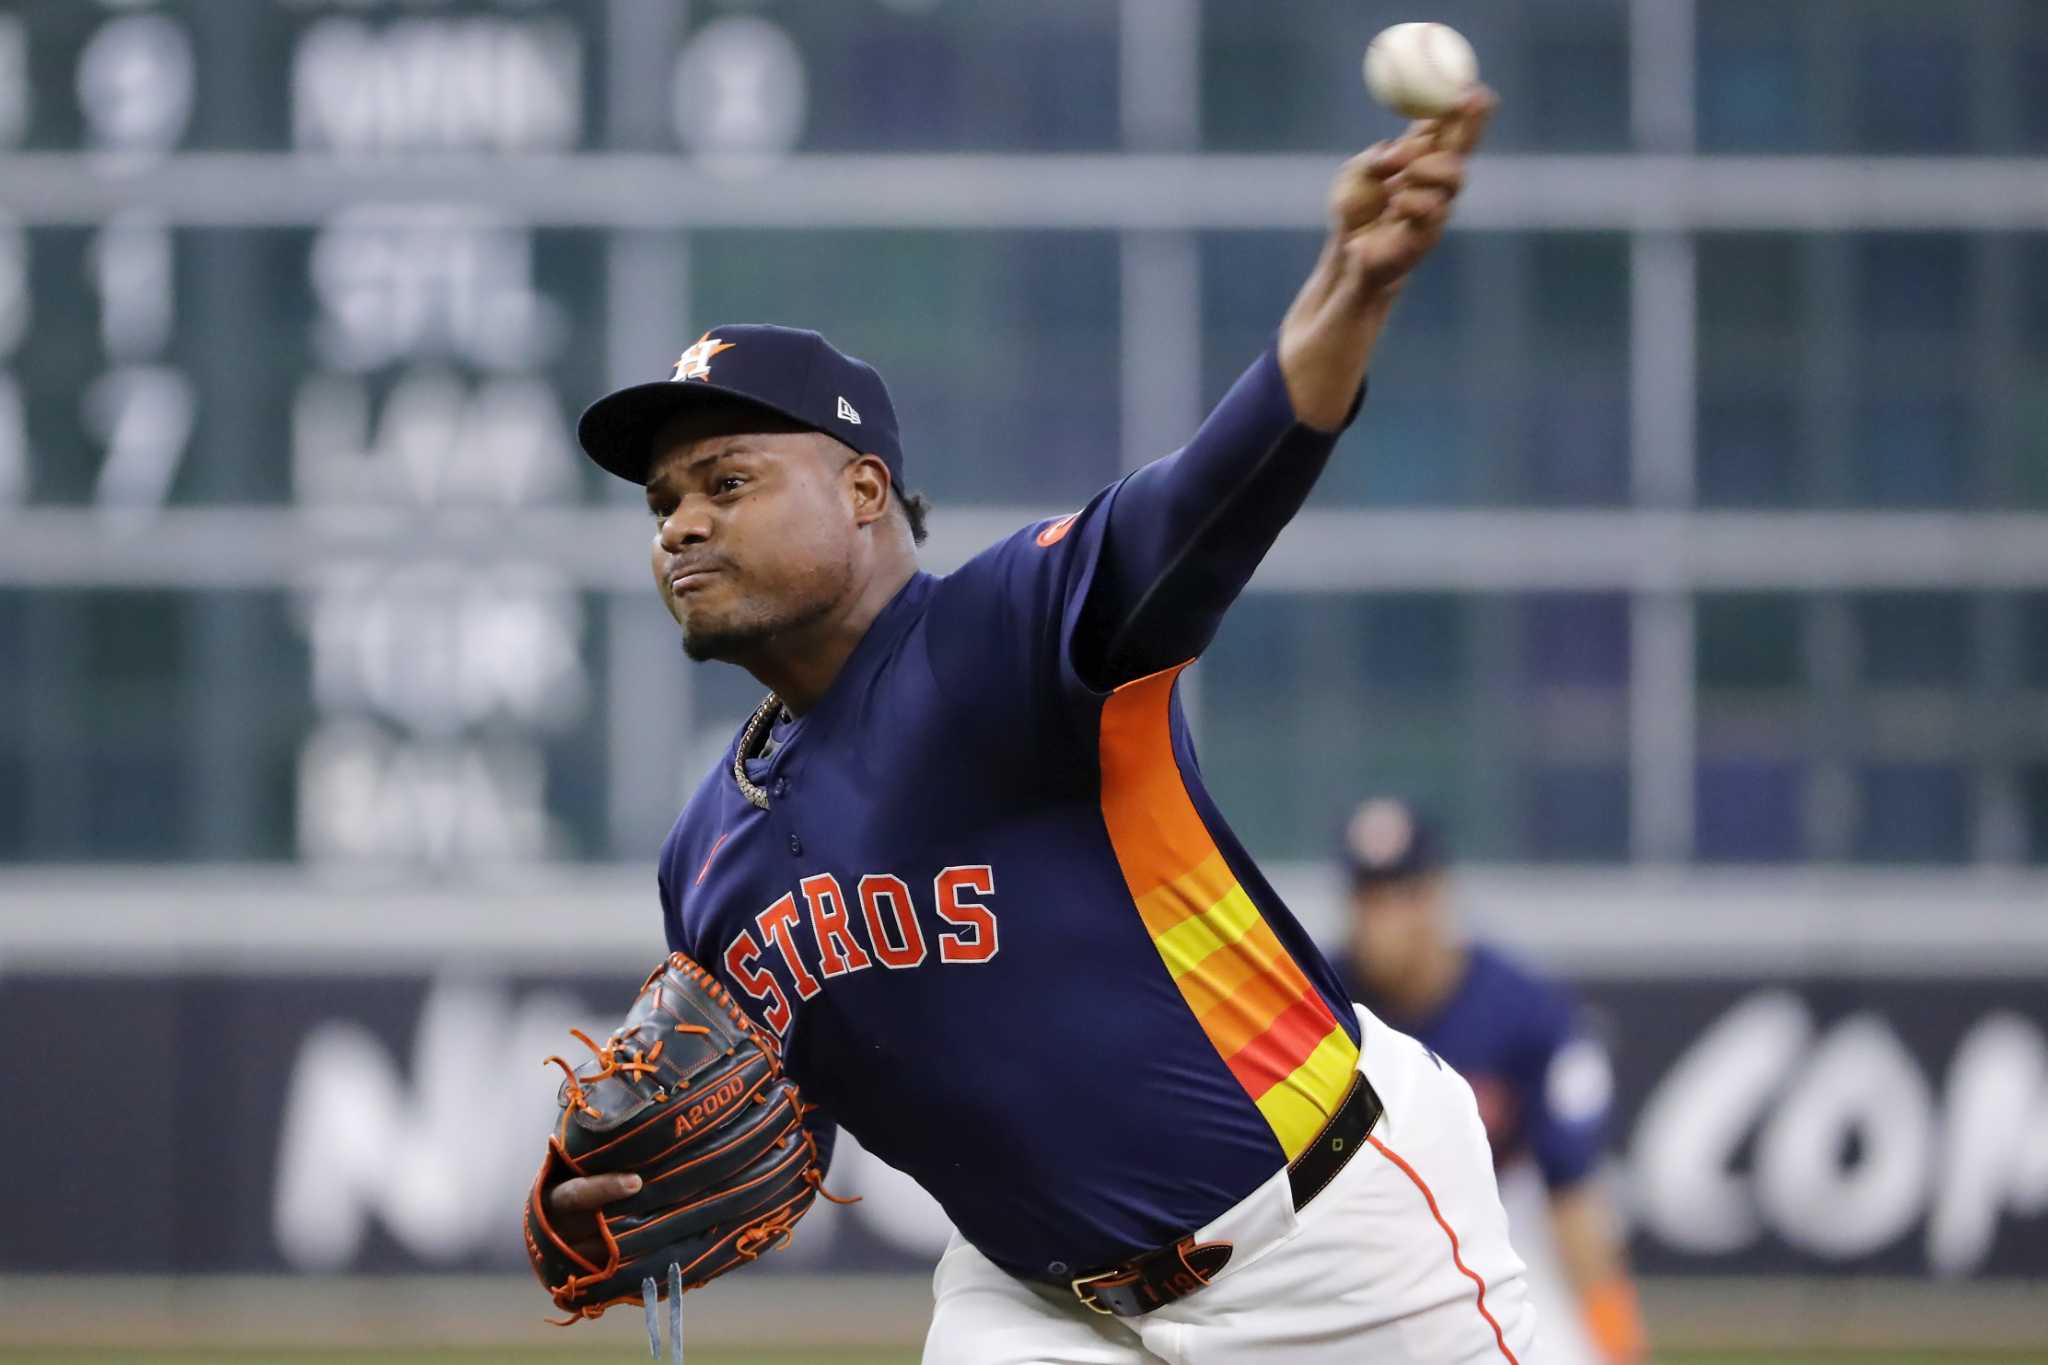 Valdez strikes out eight in seven innings, Astros limit A's to two hits in 3-0 victory